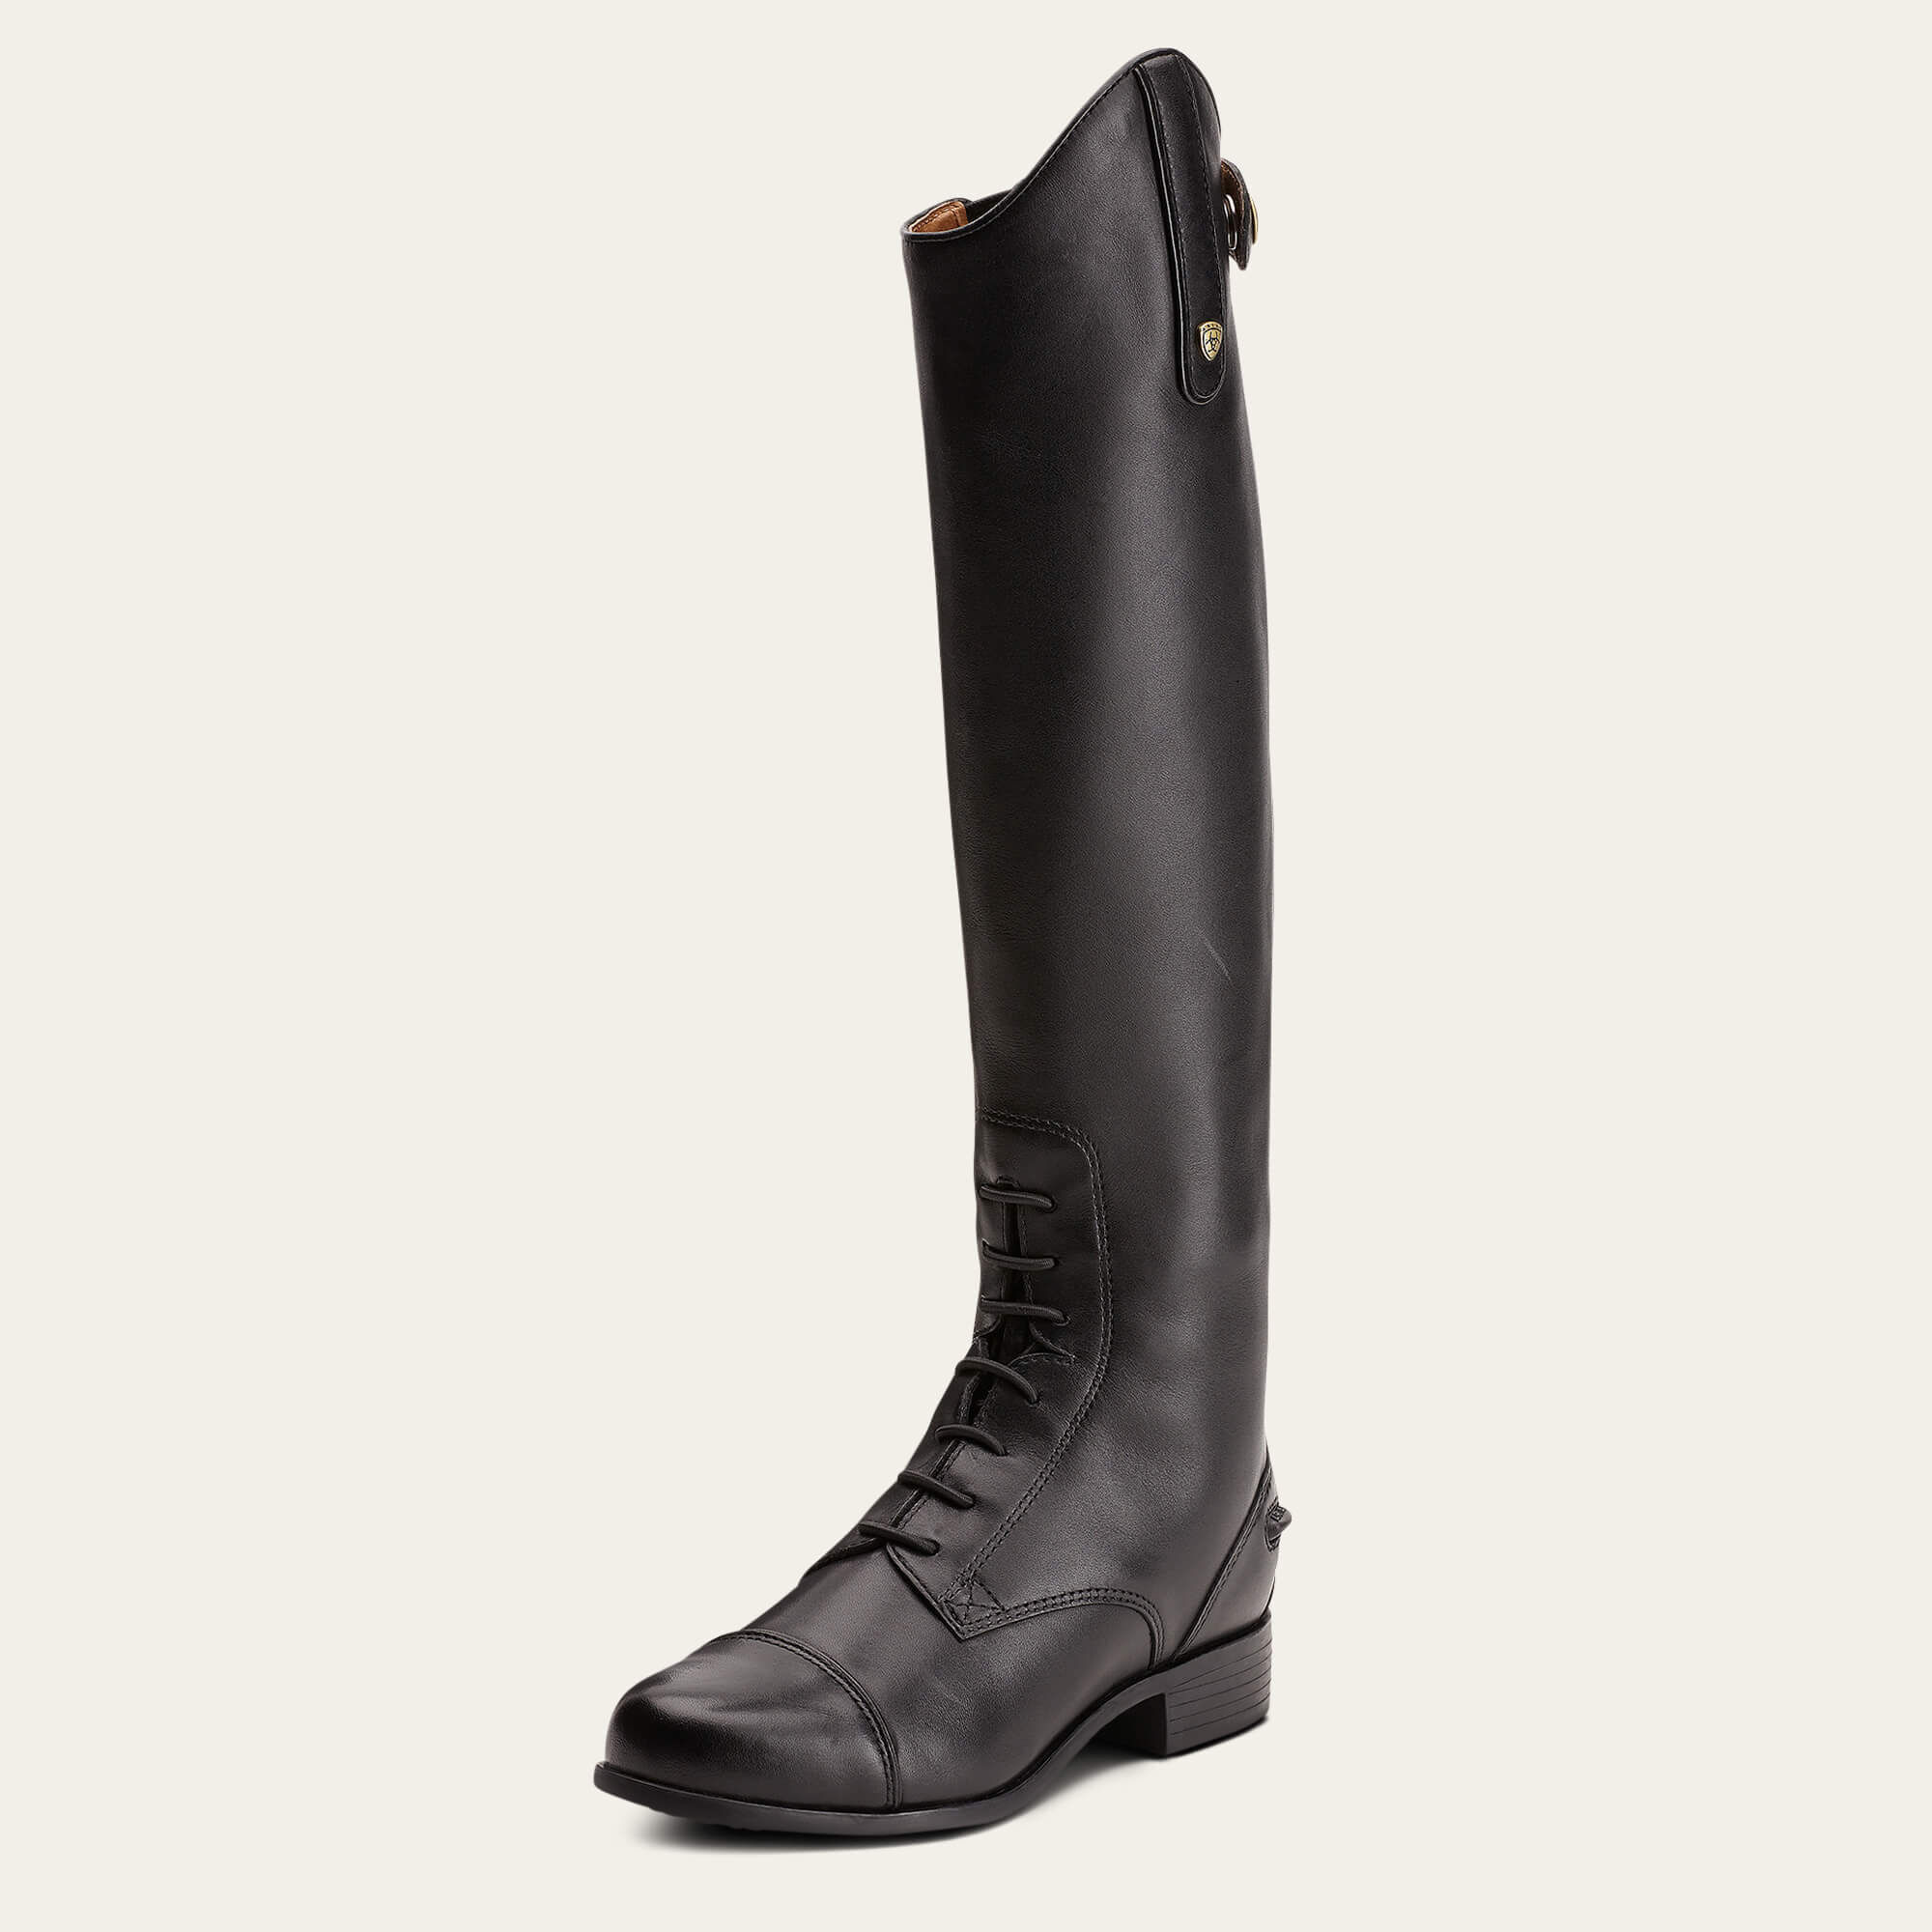 Heritage Contour Field Zip Tall Riding Boot Ariat